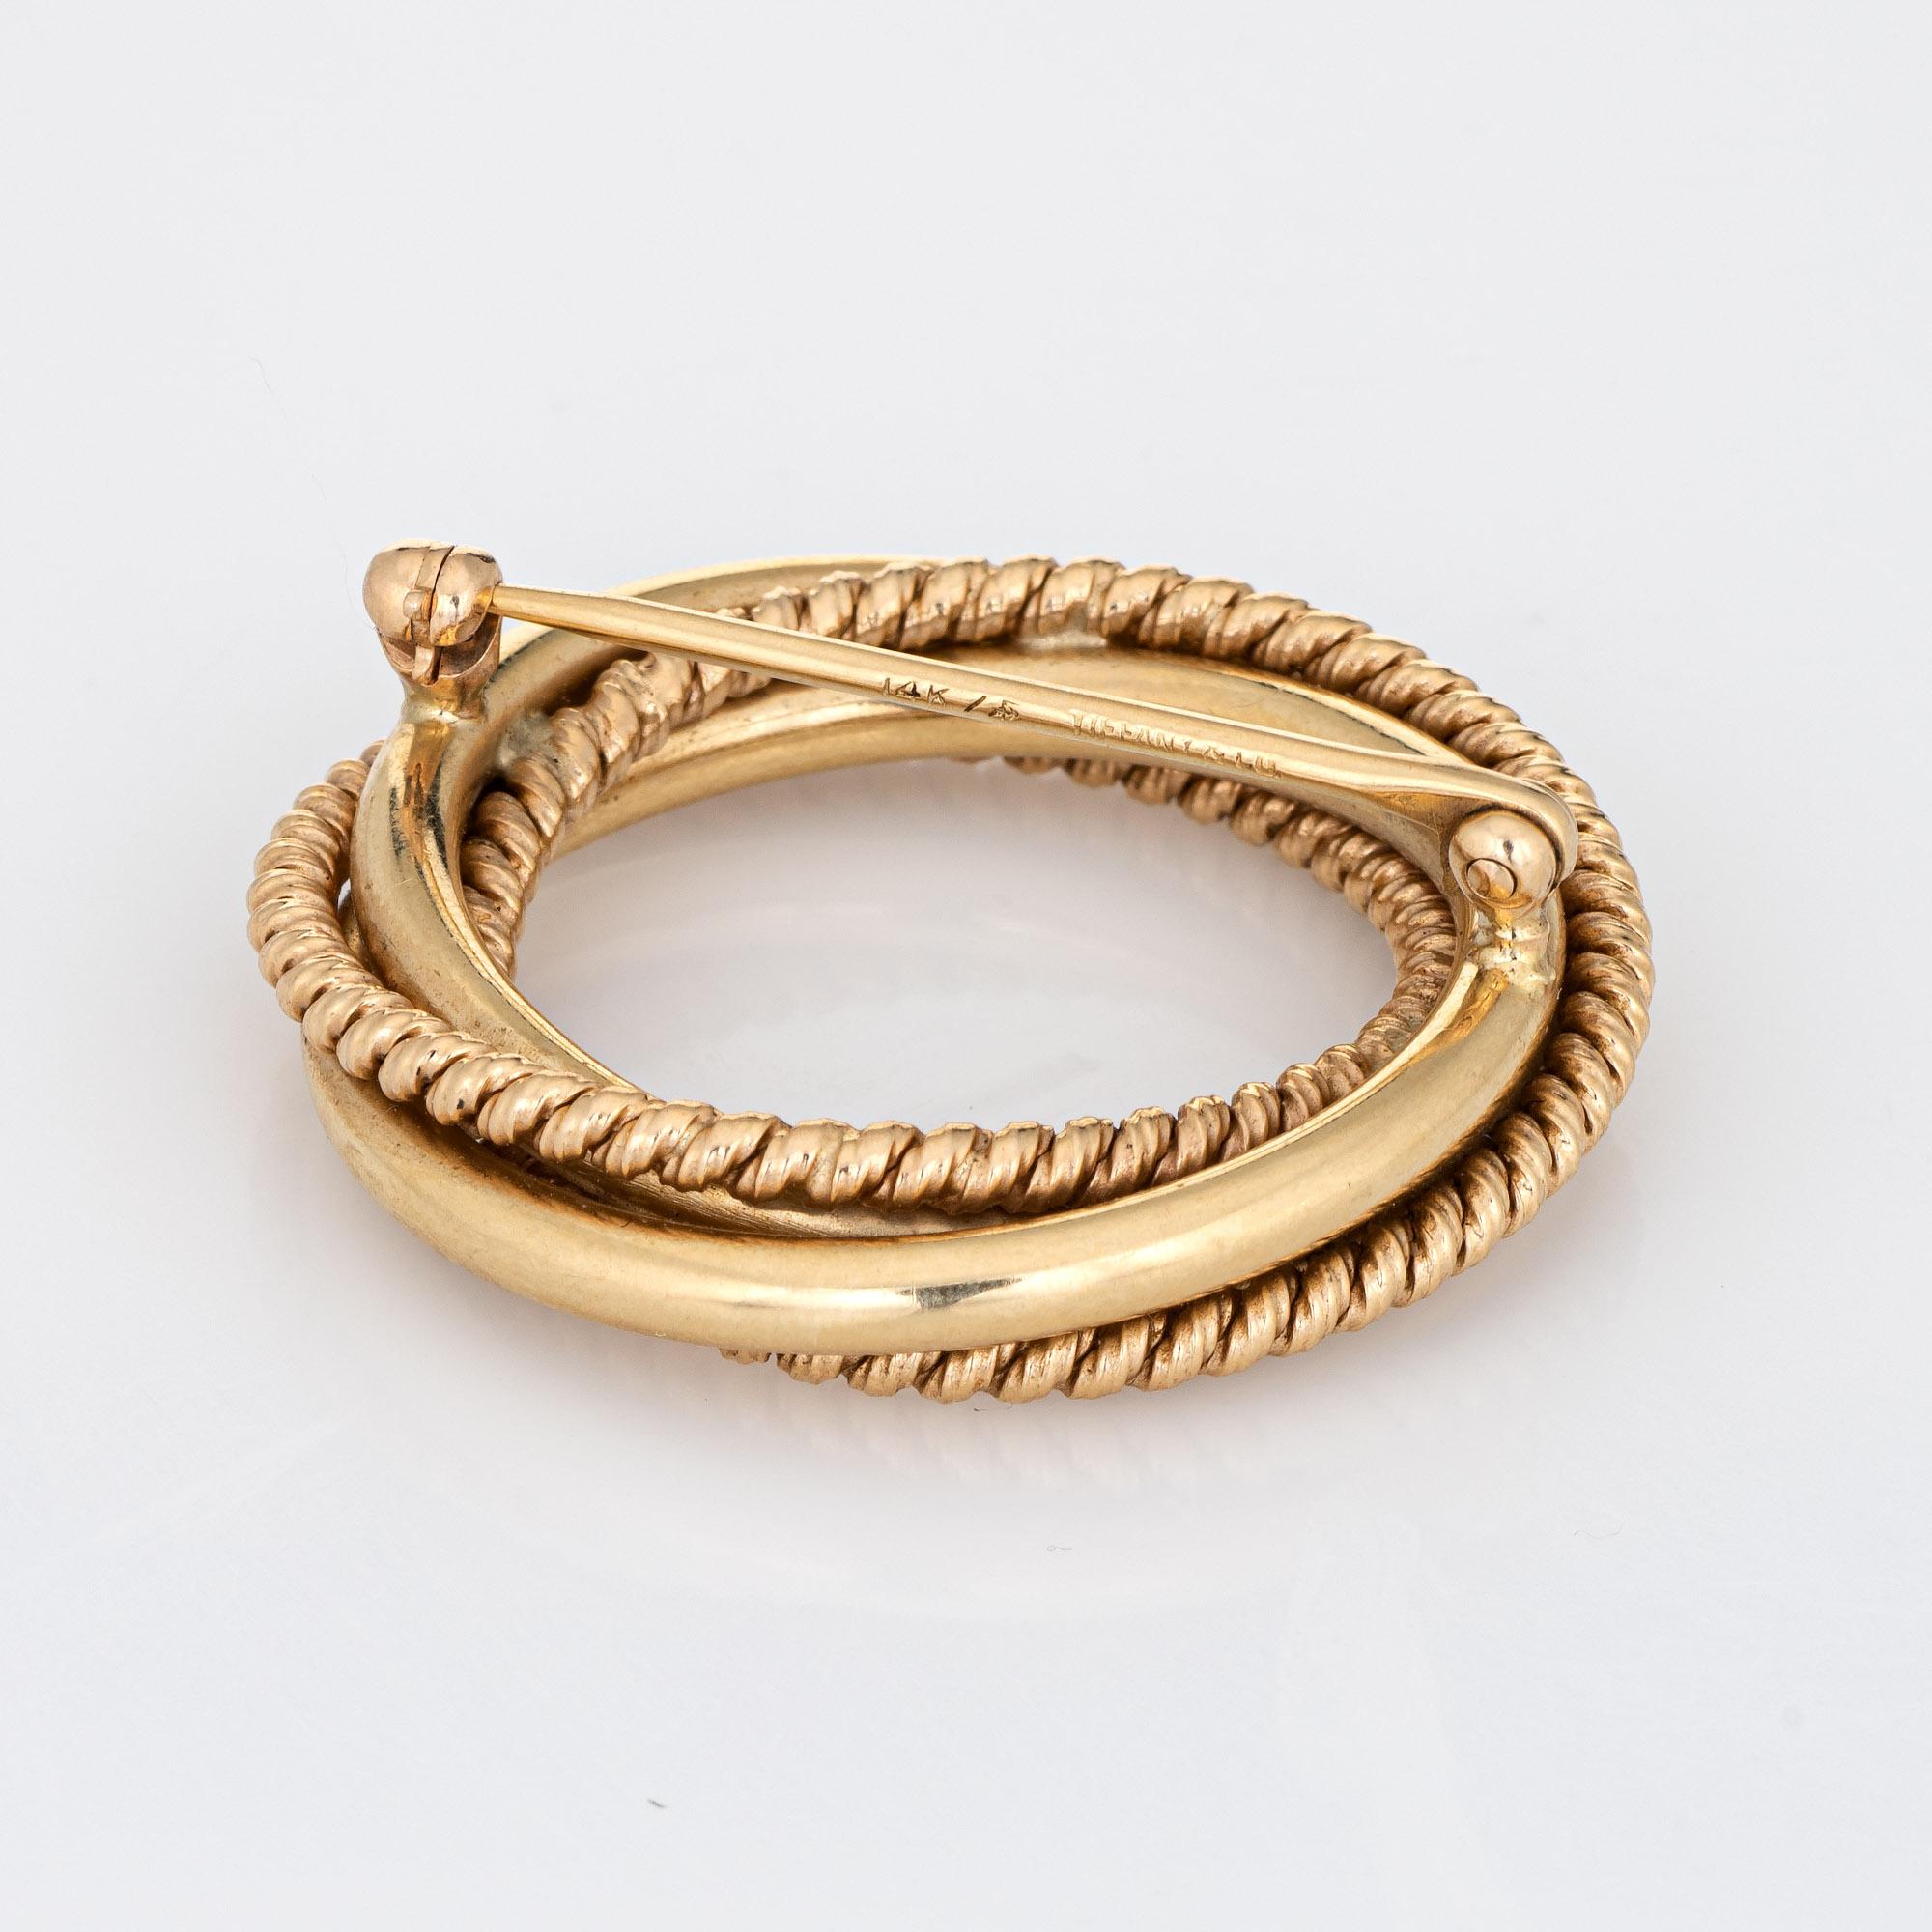 Finely detailed vintage Tiffany & Co infinity knot brooch, crafted in 14 karat yellow gold (circa 1950s to 1960s).  

The brooch is a retired piece and no longer made by Tiffany & Co. The brooch highlights rope and polished gold details, gracefully